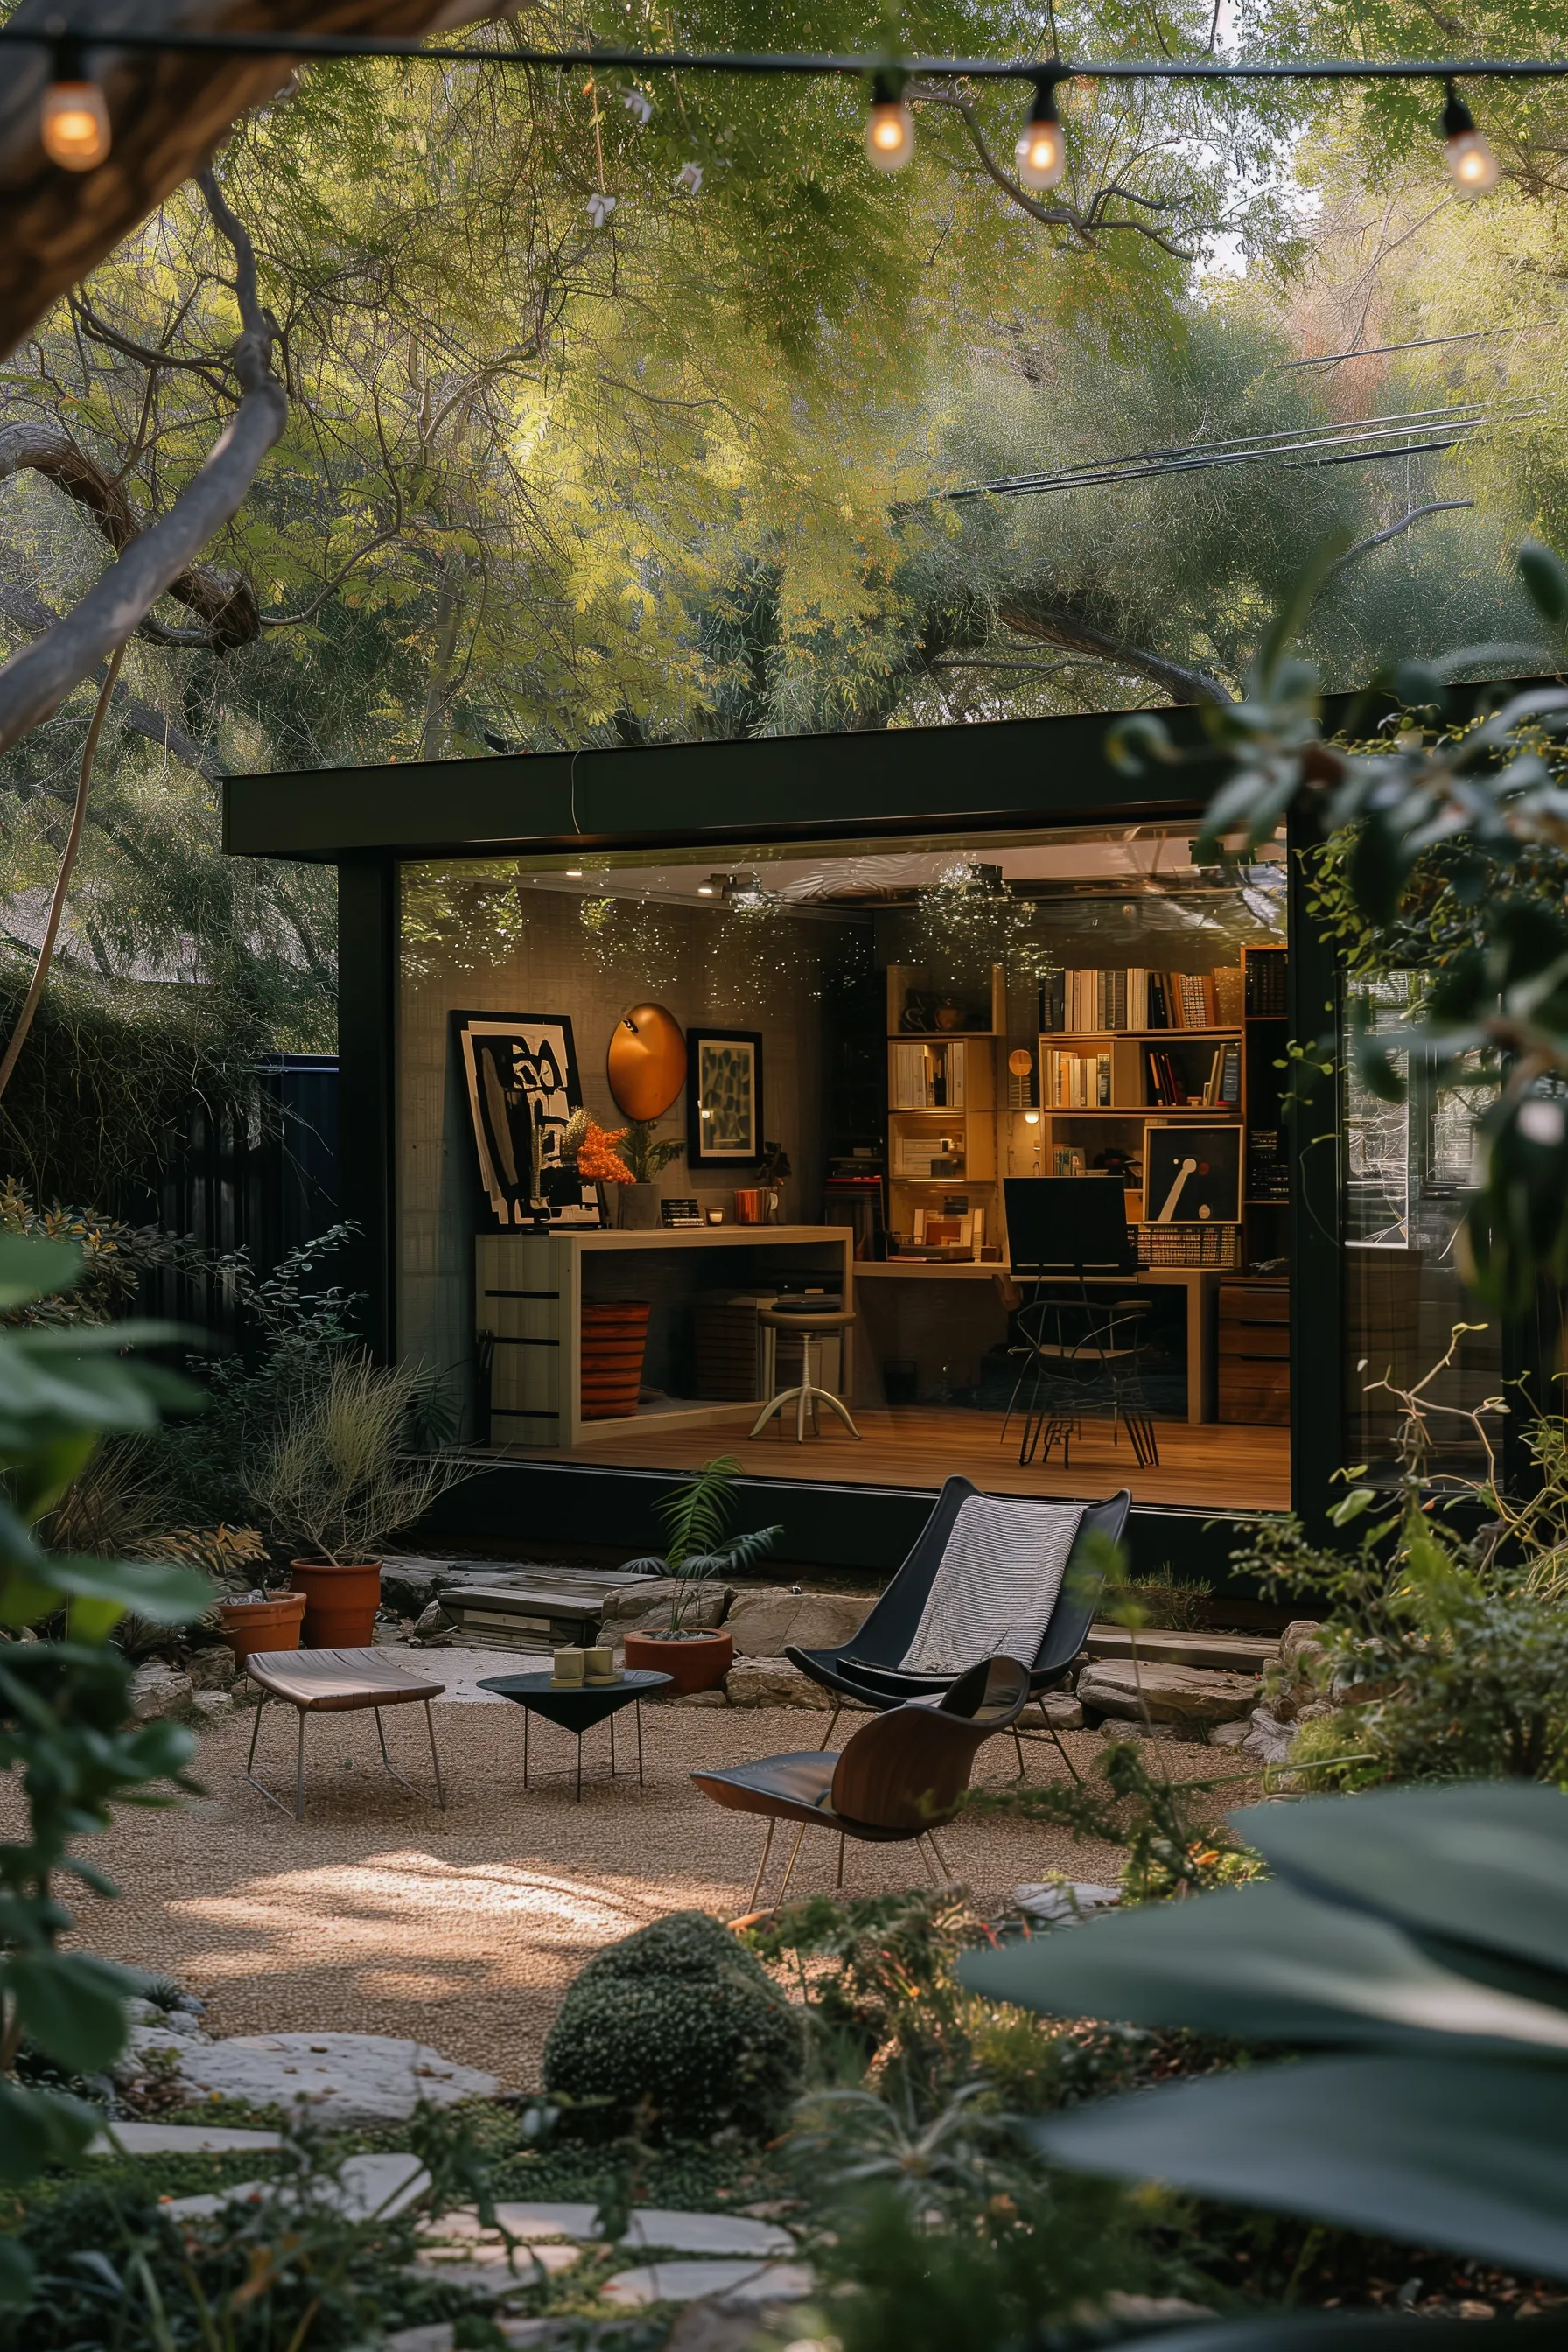 An art studio with outdoor seating